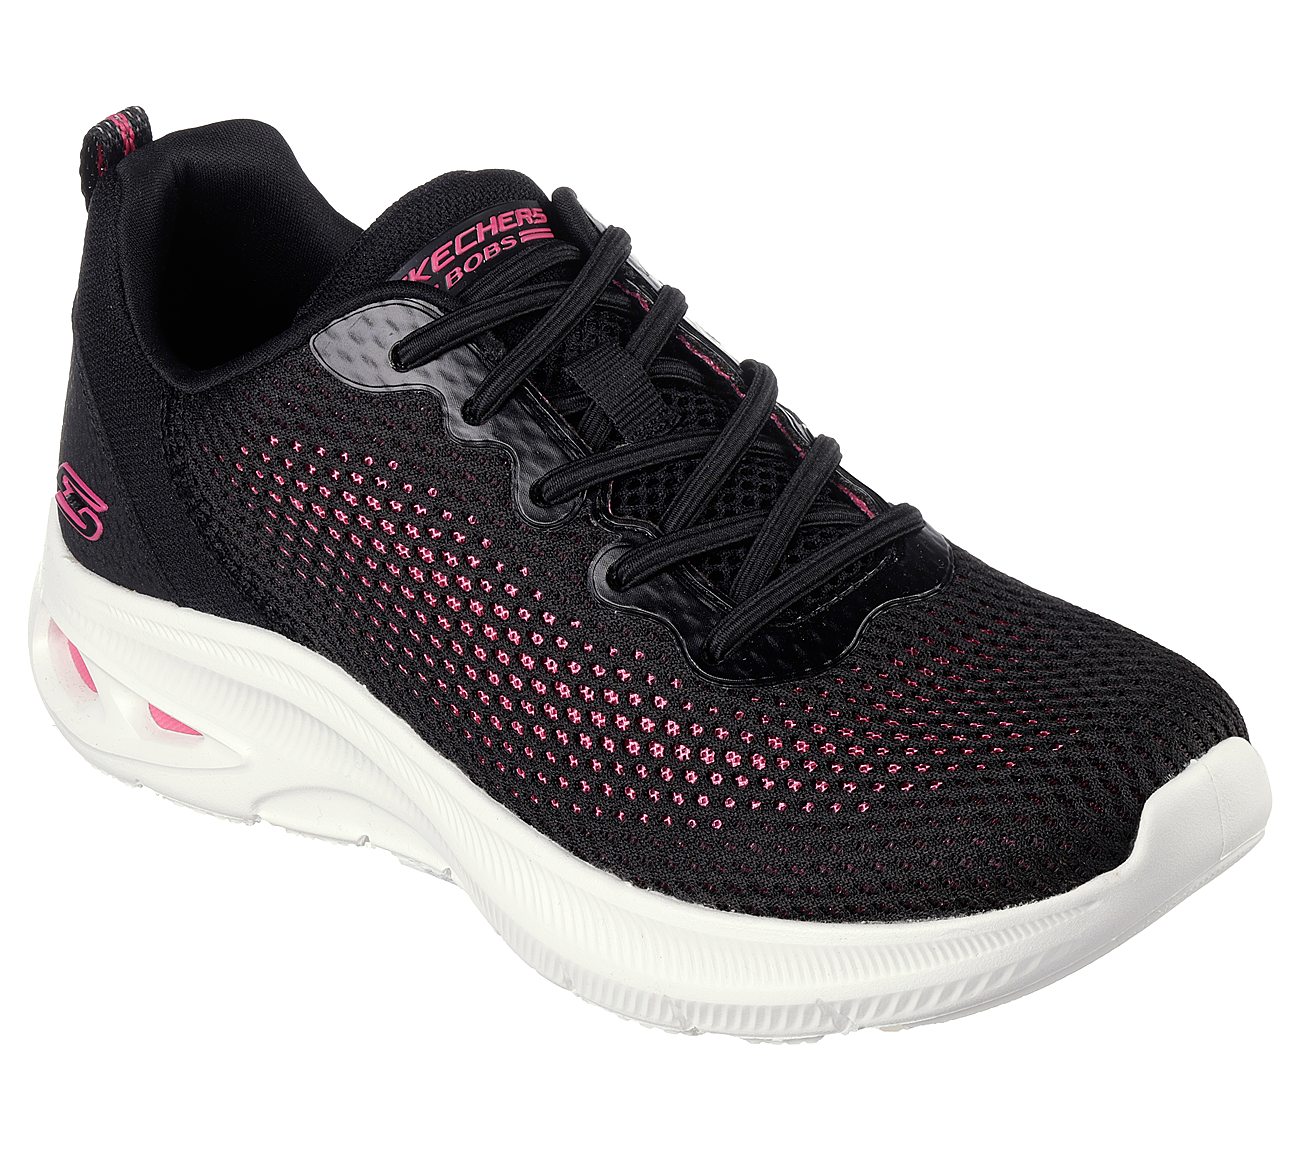 BOBS UNITY - HINT OF COLOR, BLACK/HOT PINK Footwear Right View